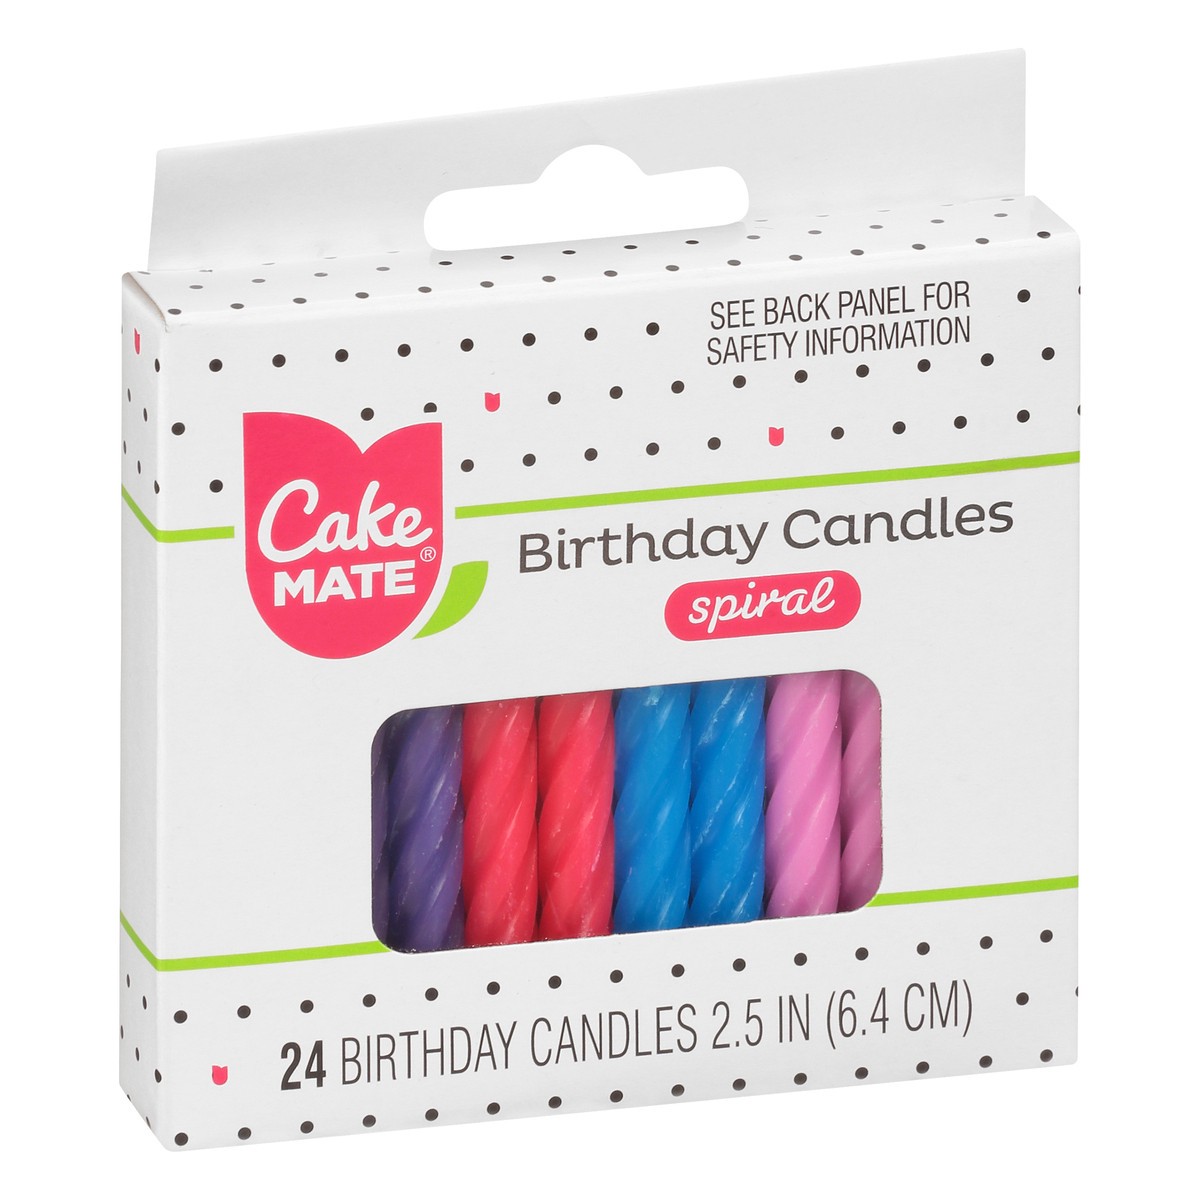 slide 2 of 9, Cake Mate 2.5 Inch Spiral Birthday Candles 24 ea, 24 ct